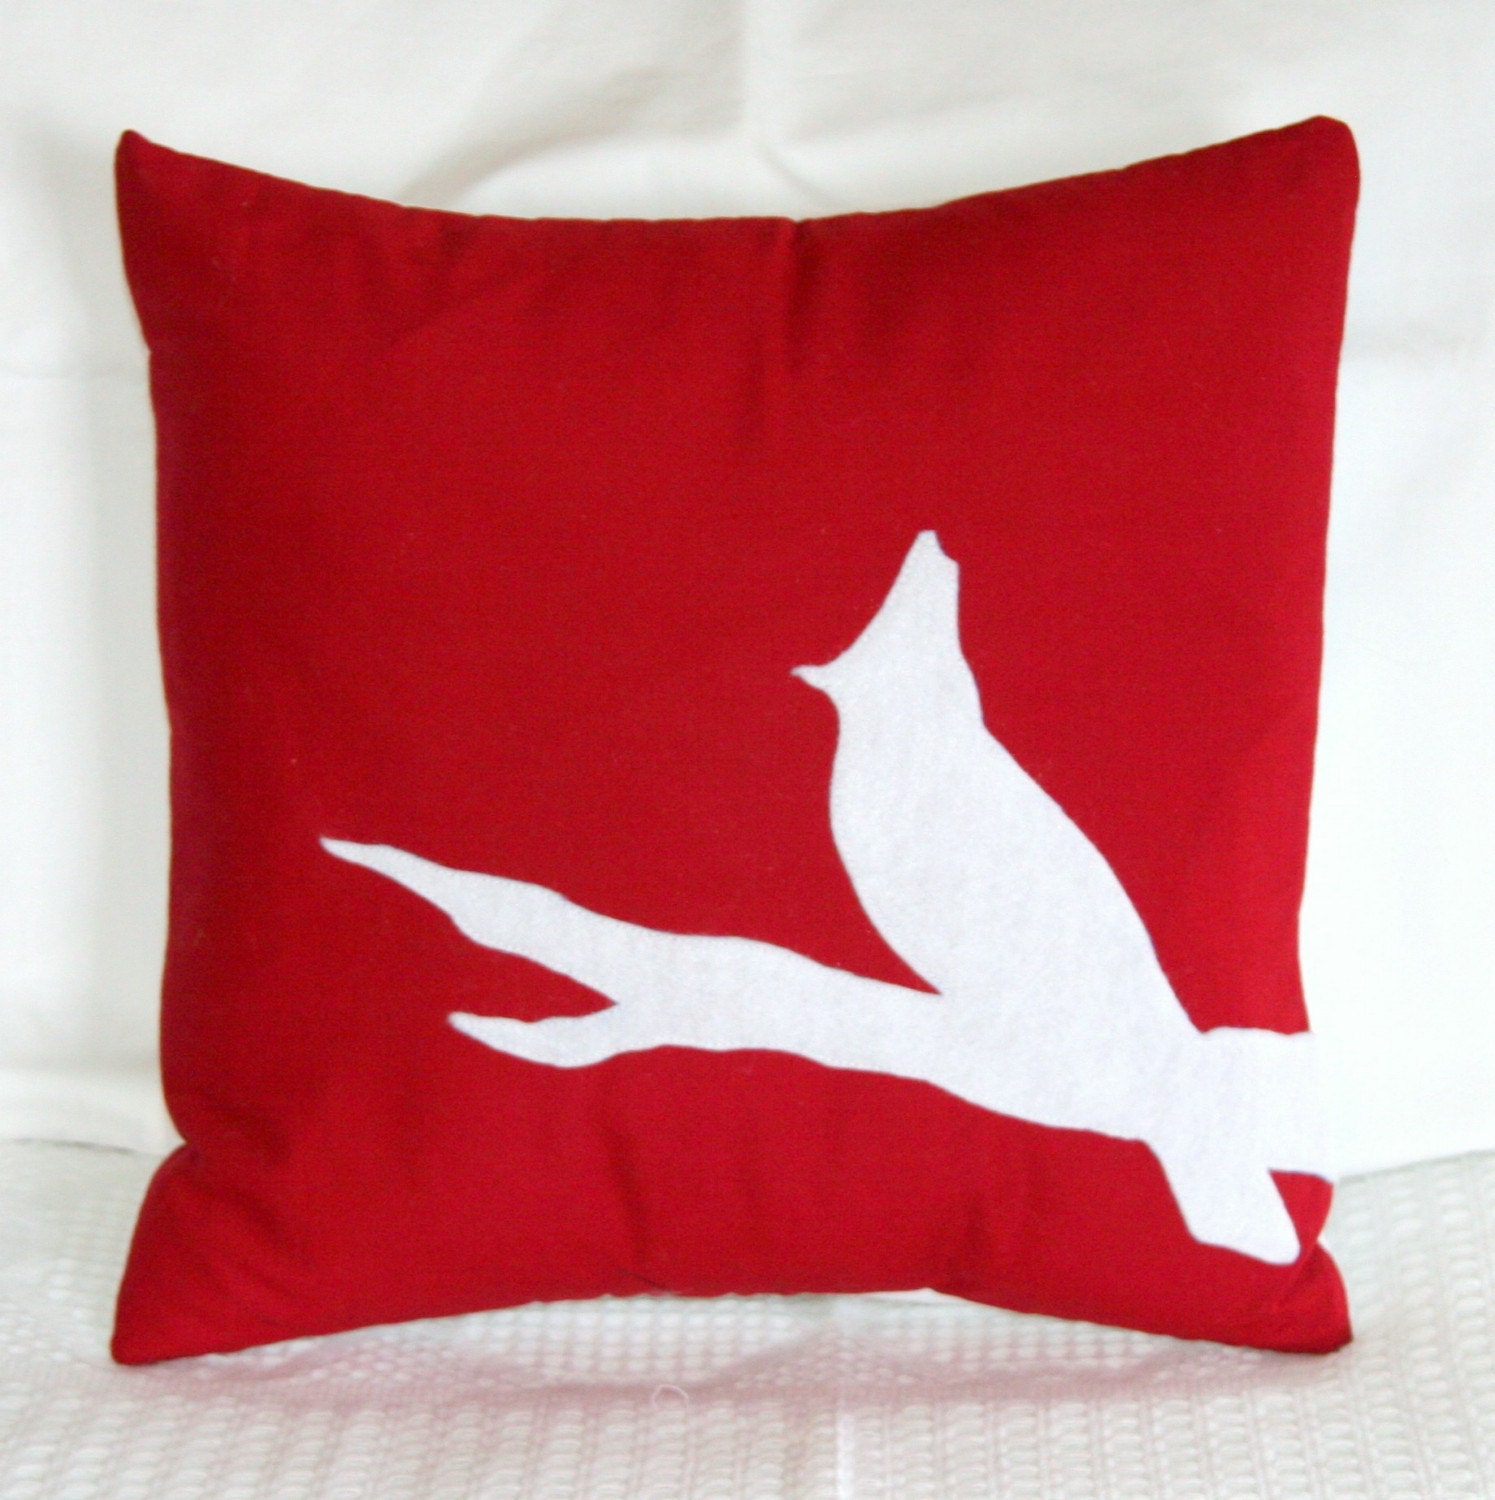 Cardinal Silhouette- Pillow Cover- 14x14 inches- Eco Friendly